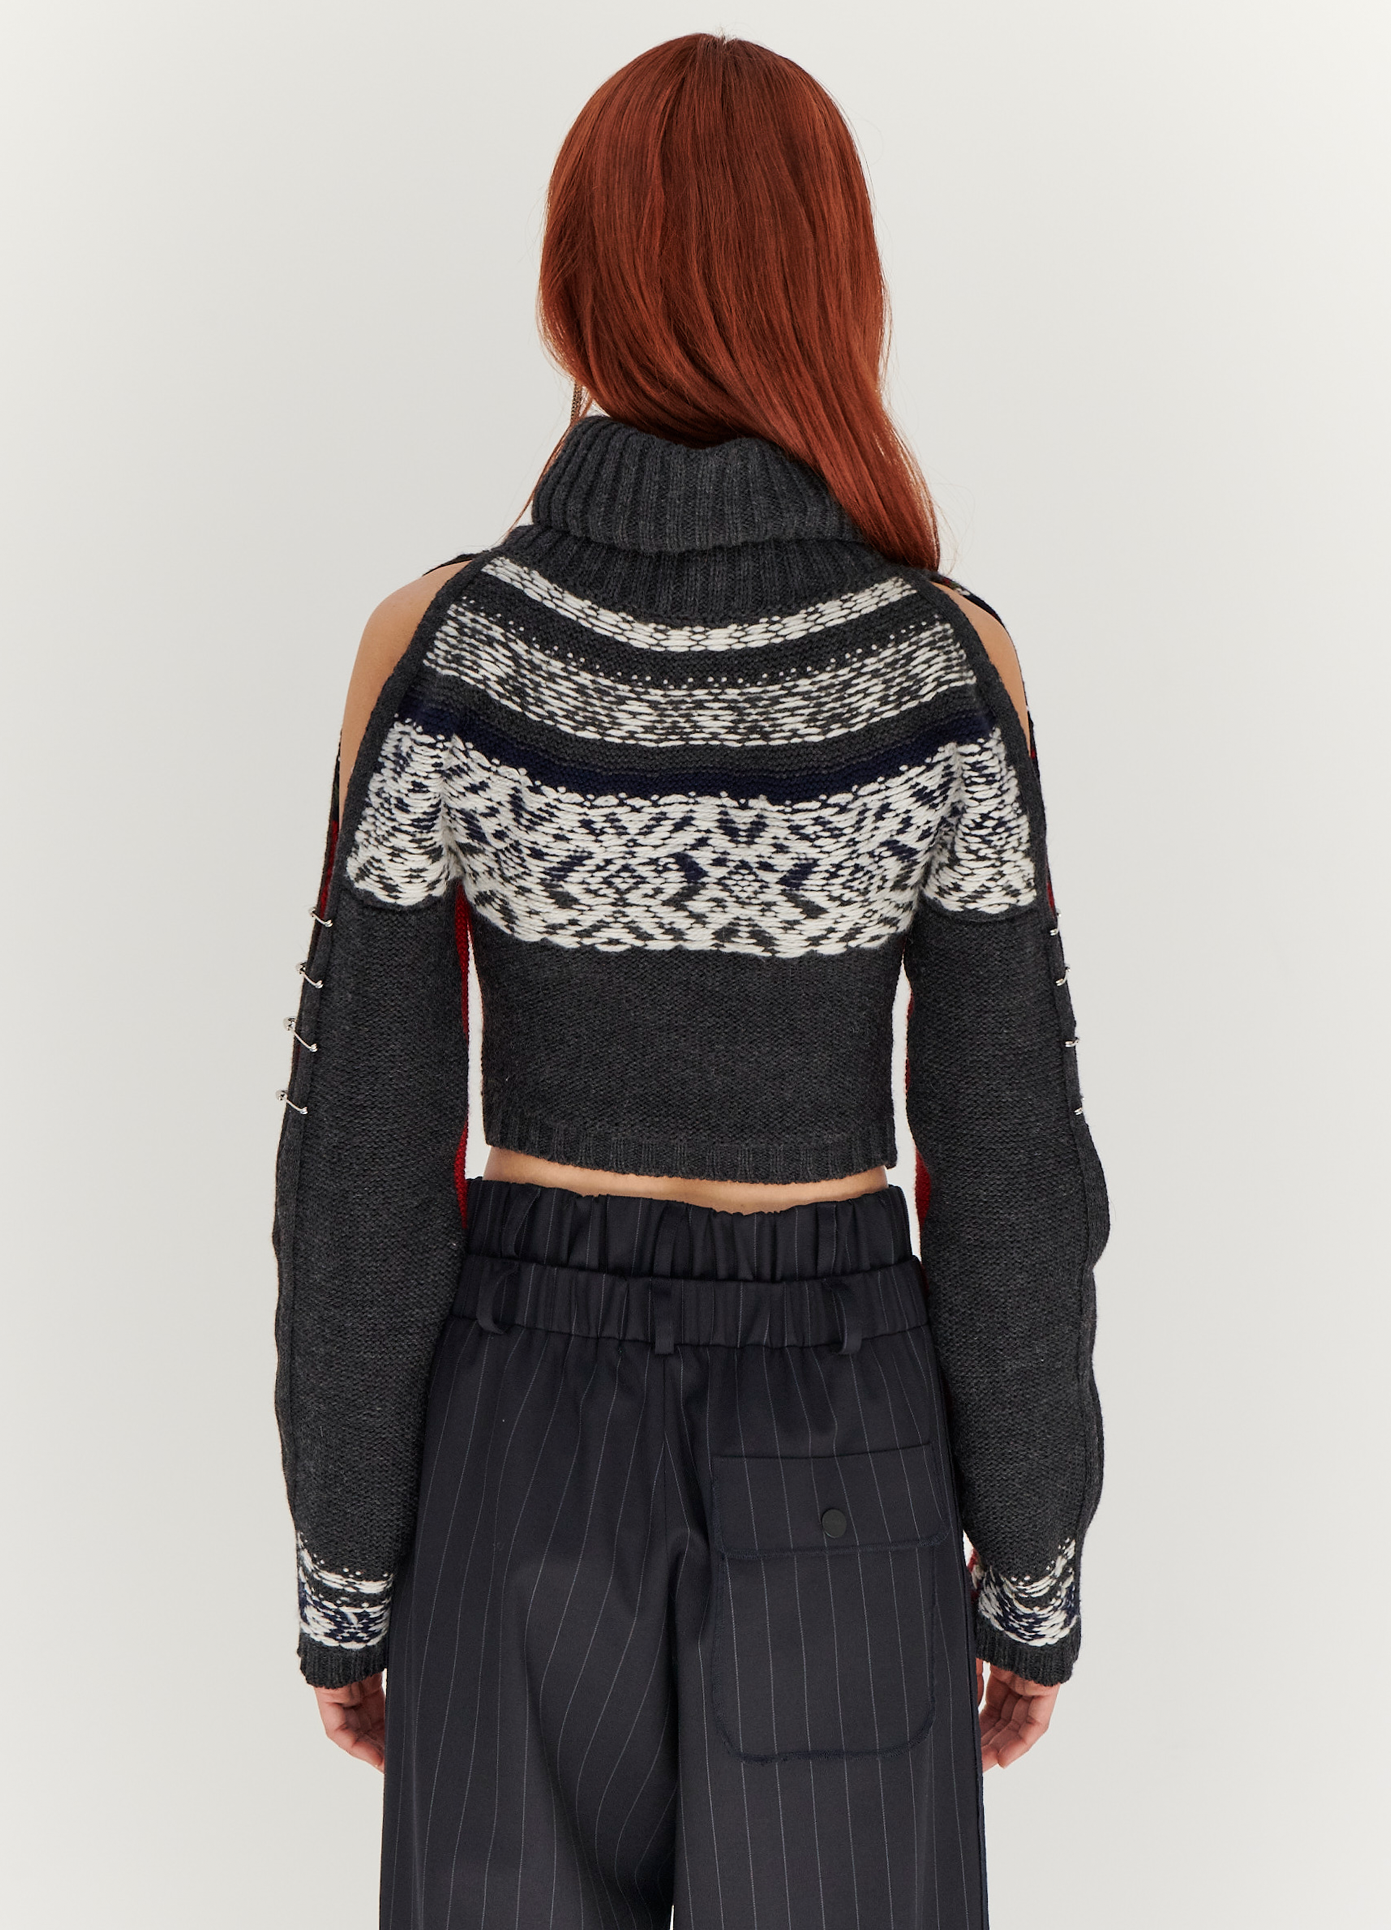 MONSE Cropped Fairisle Turtleneck Sweater  in Red and Charcoal on model back view